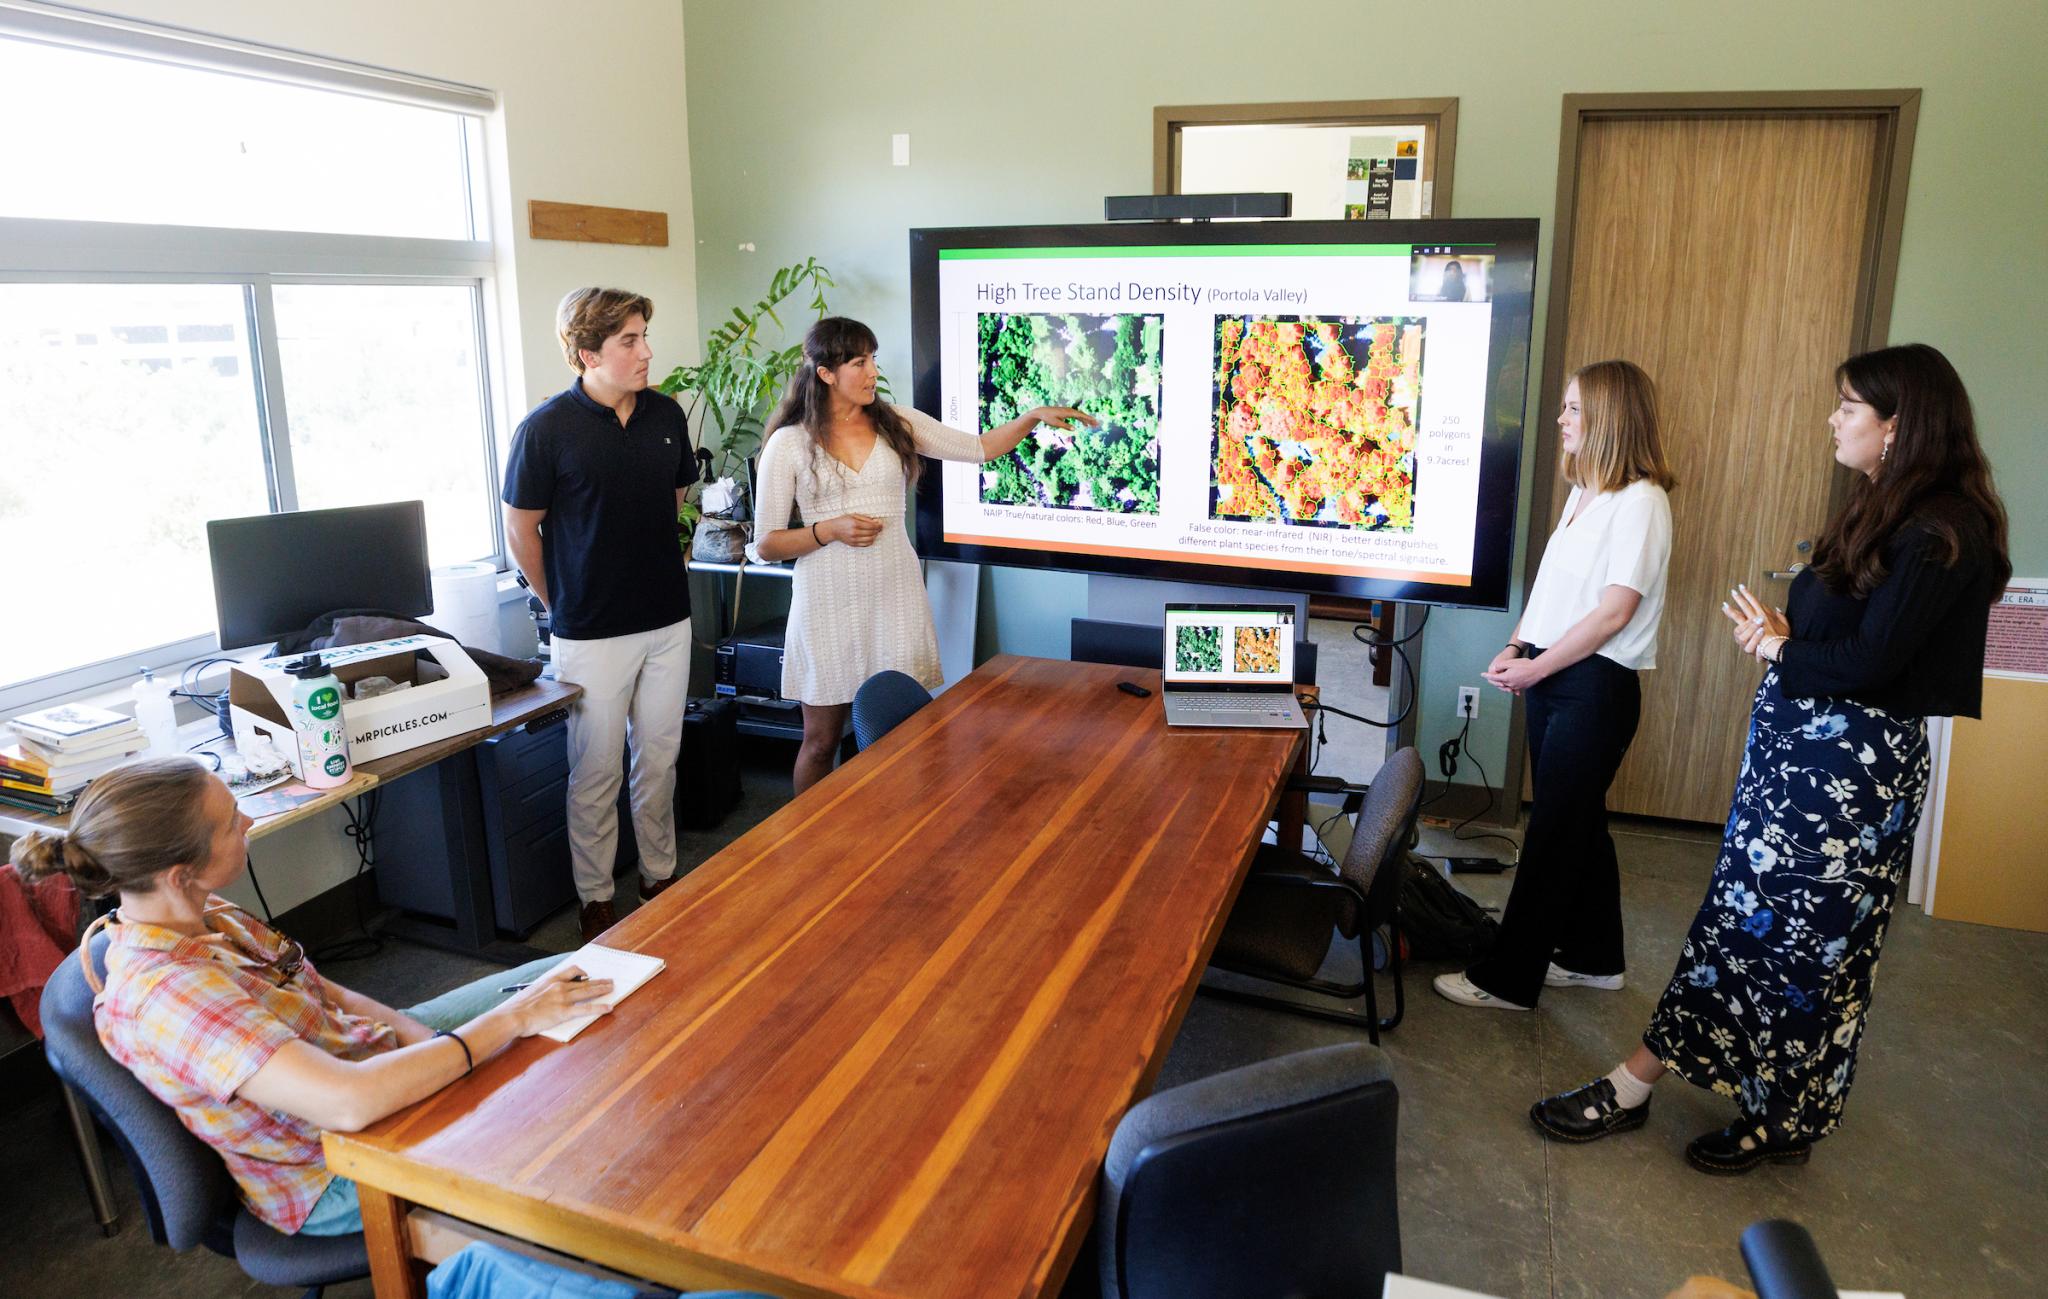 Students present their tree canopy research to a professor, who is sitting.